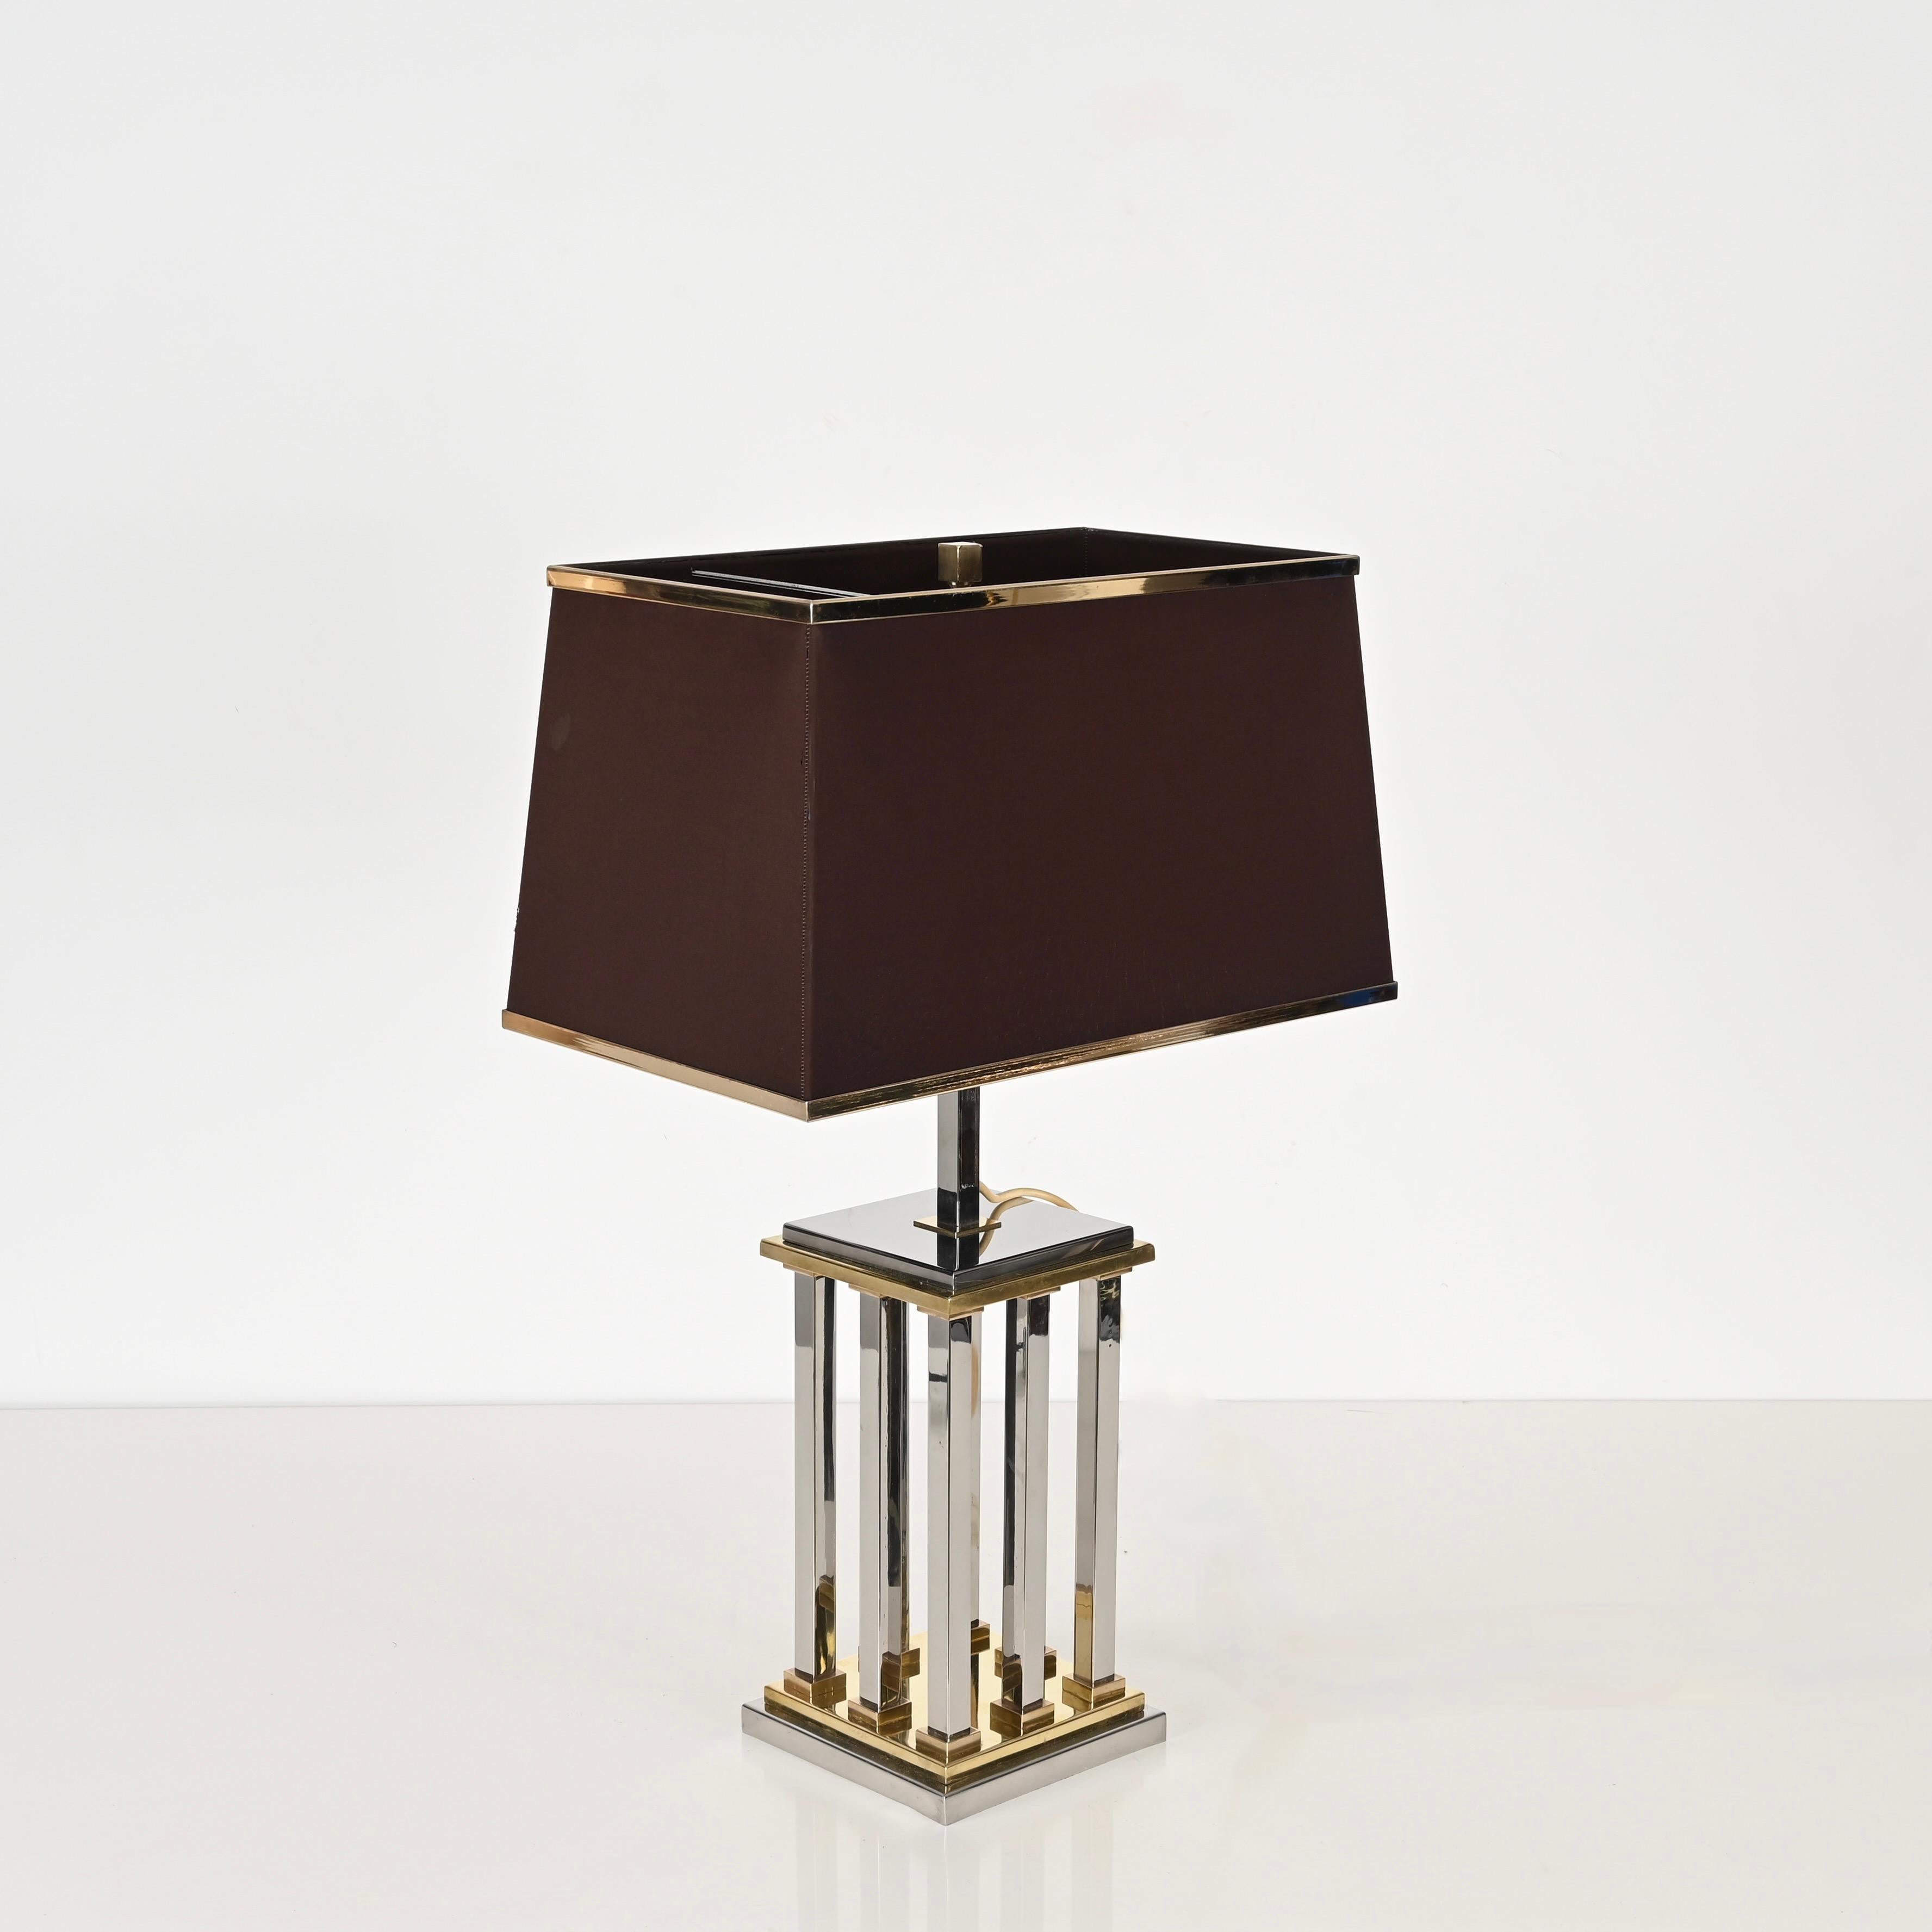 Late 20th Century Hollywood Regency Chrome and Brass Columns Table Lamp by Rome Rega, Italy 1970s For Sale